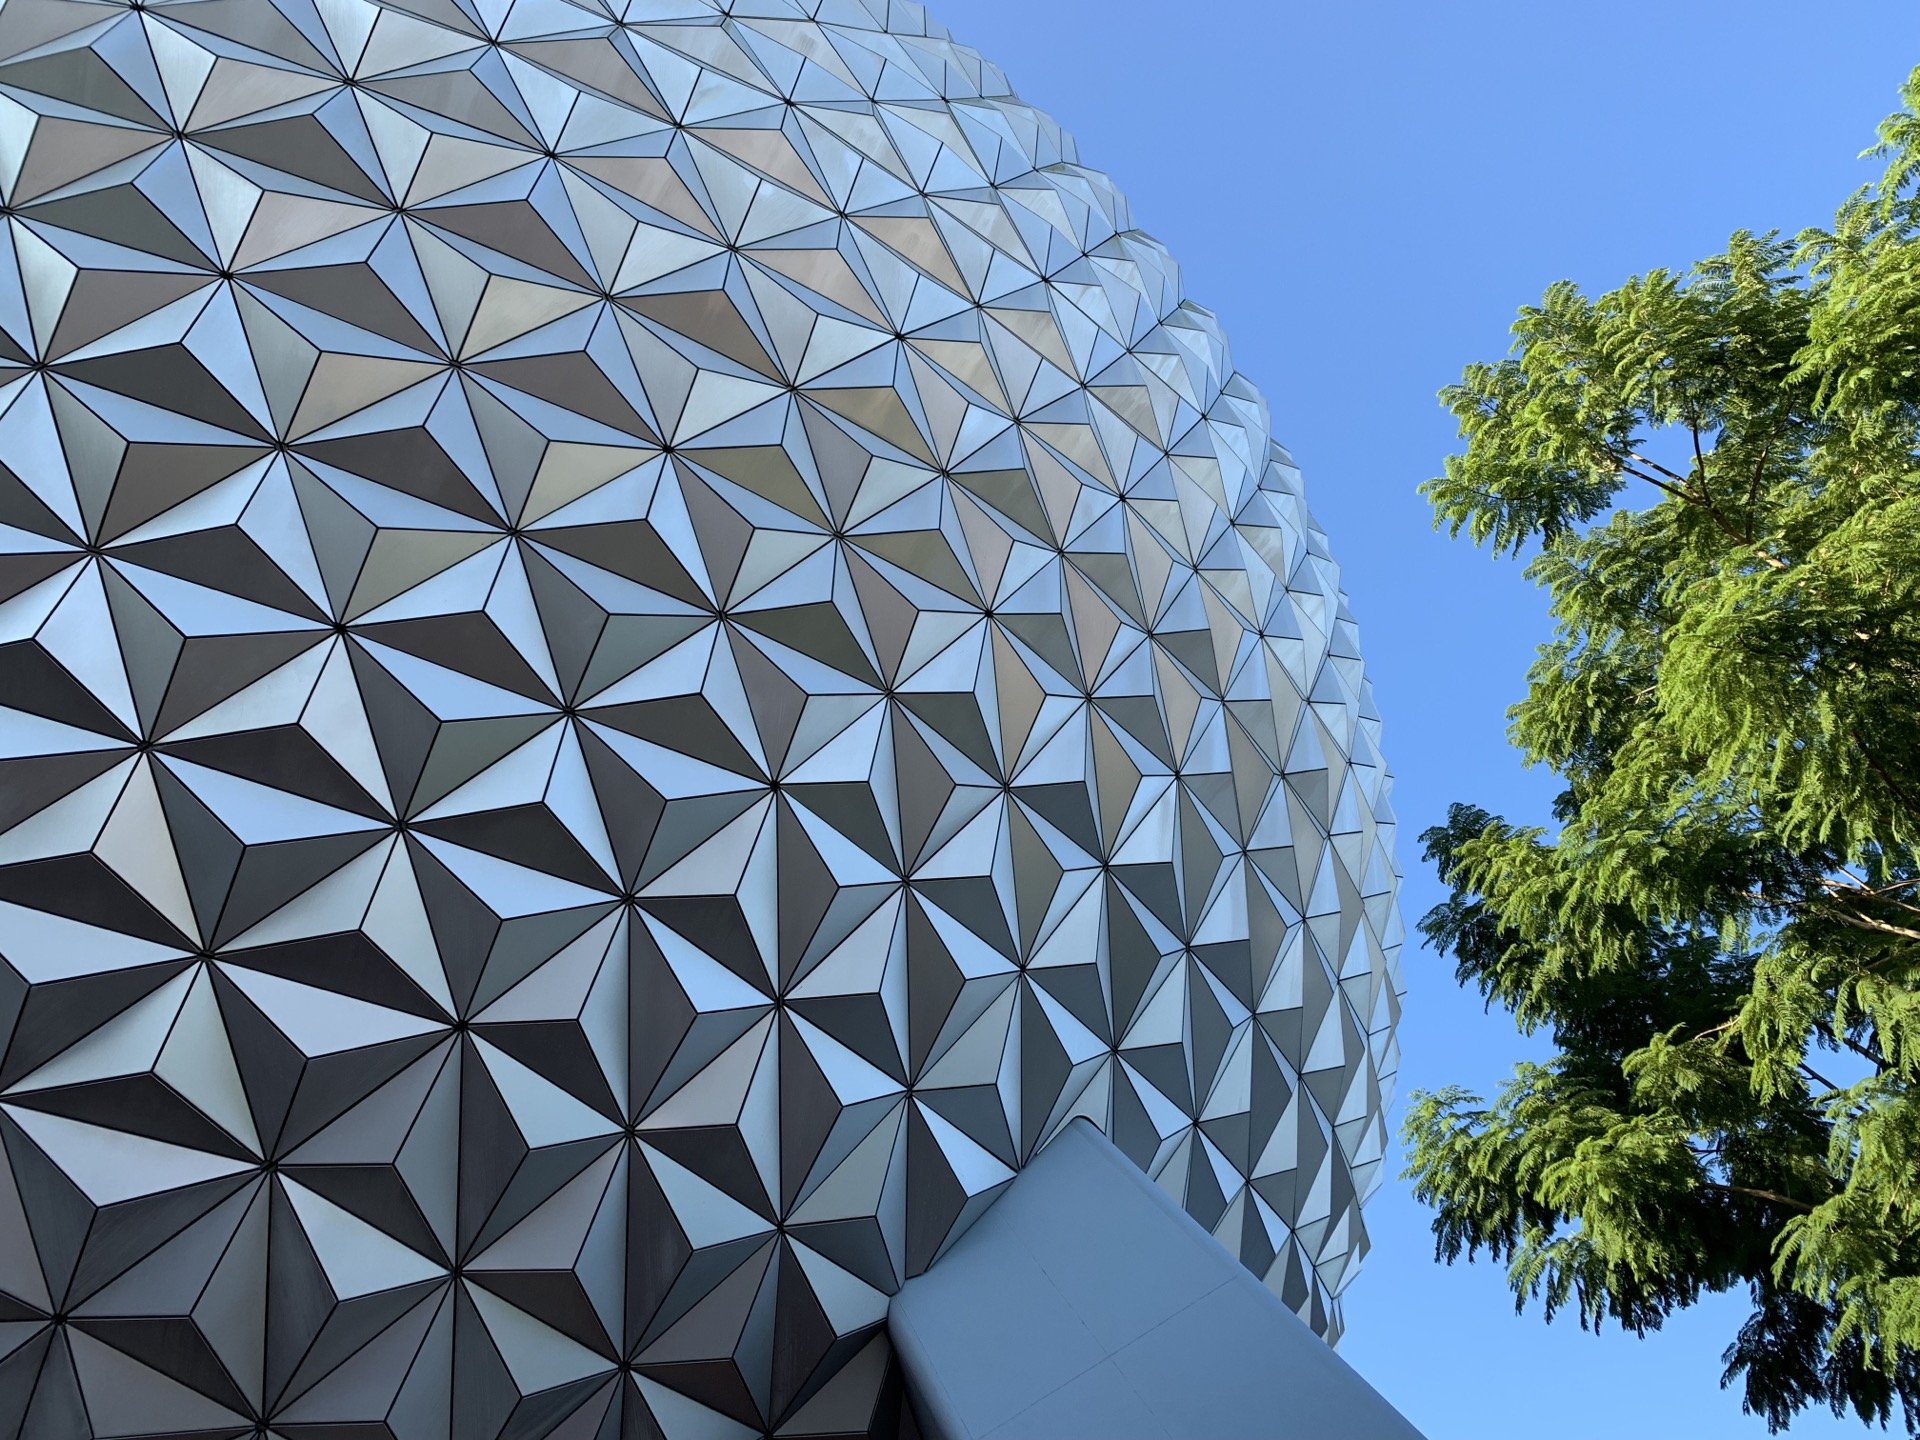 Guide to Spaceship Earth at EPCOT - Mouse Hacking